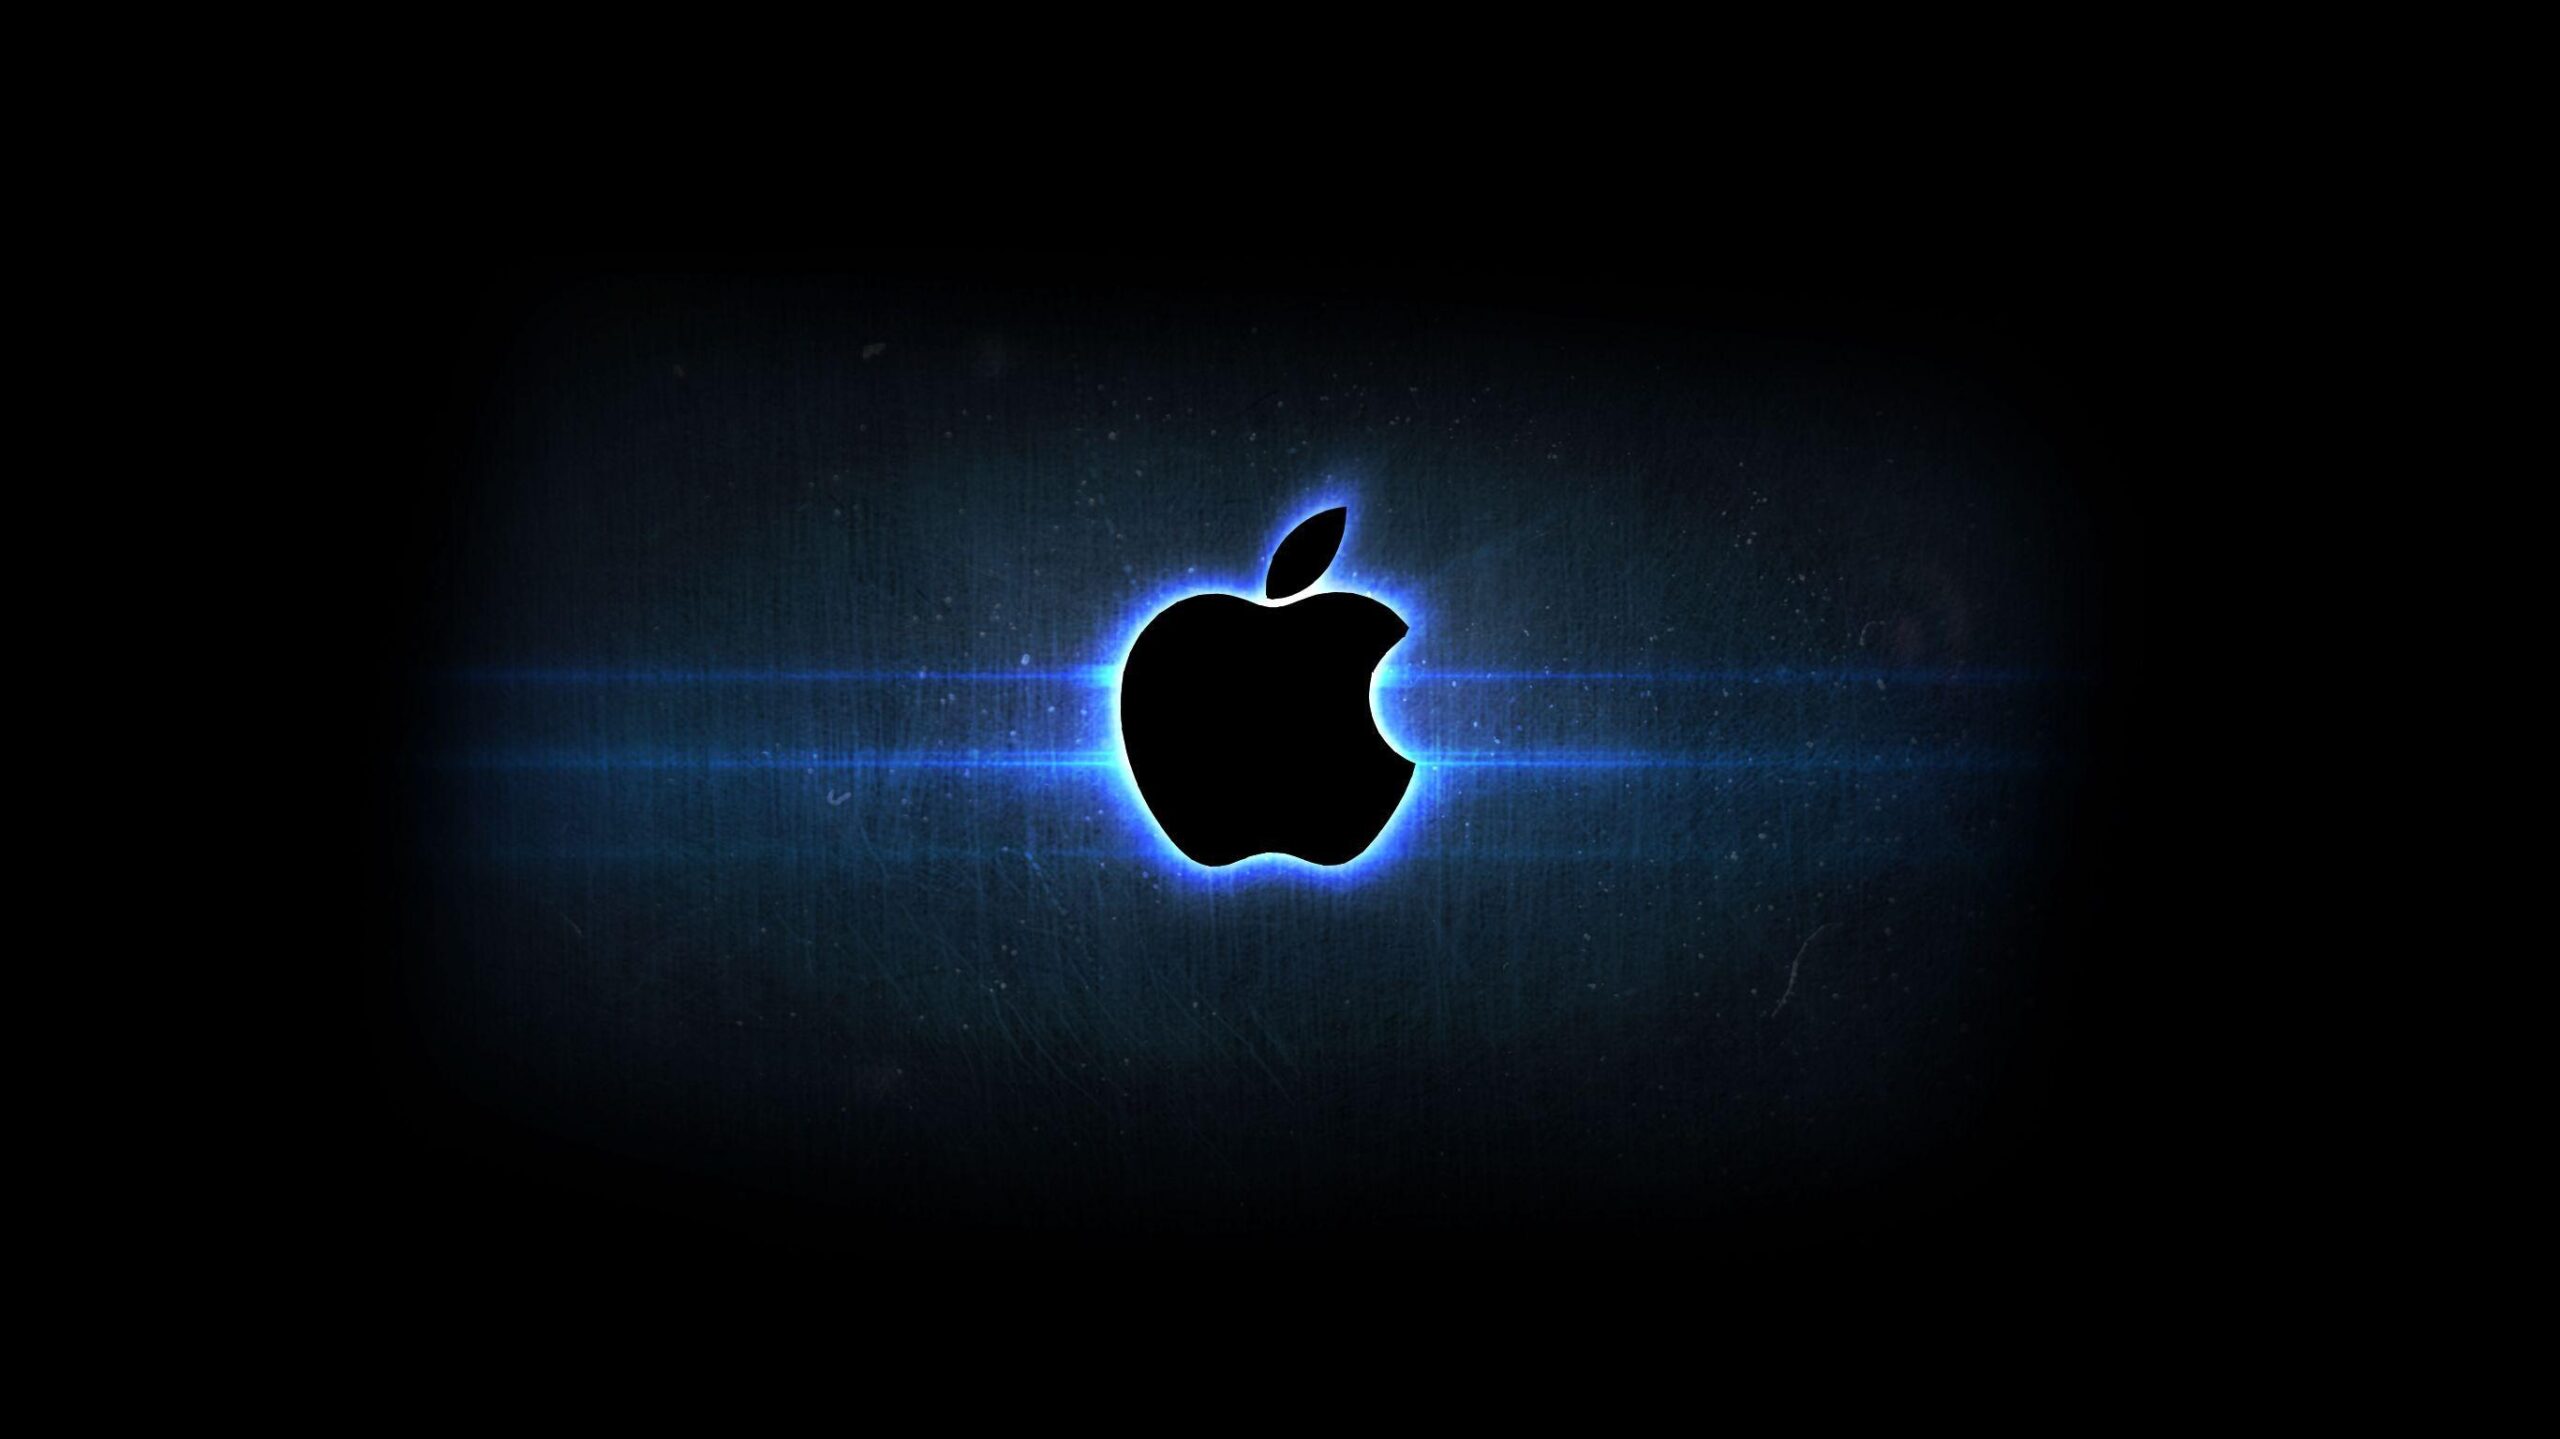 Apple Wallpaper|Backgrounds by TimSaunders